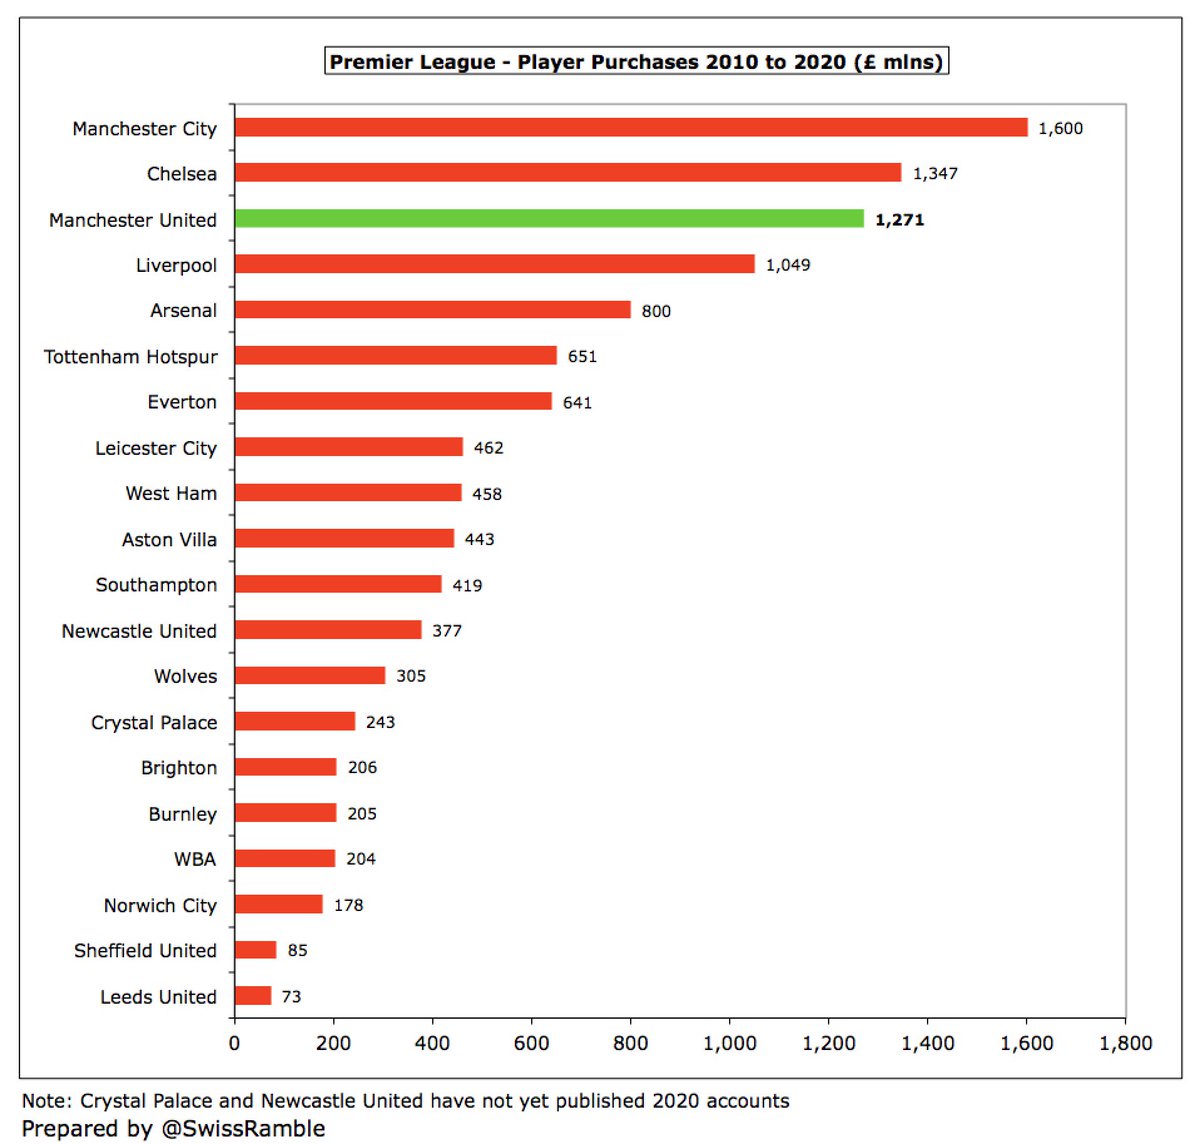 That said,  #MUFC have splashed out a hefty £1.3 bln on player purchases since 2010. This was surpassed by  #MCFC £1.6 bln and  #CFC £1.3 bln, but was much more than the likes of  #LFC £1.0 bln,  #AFC £800m and  #THFC £651m.